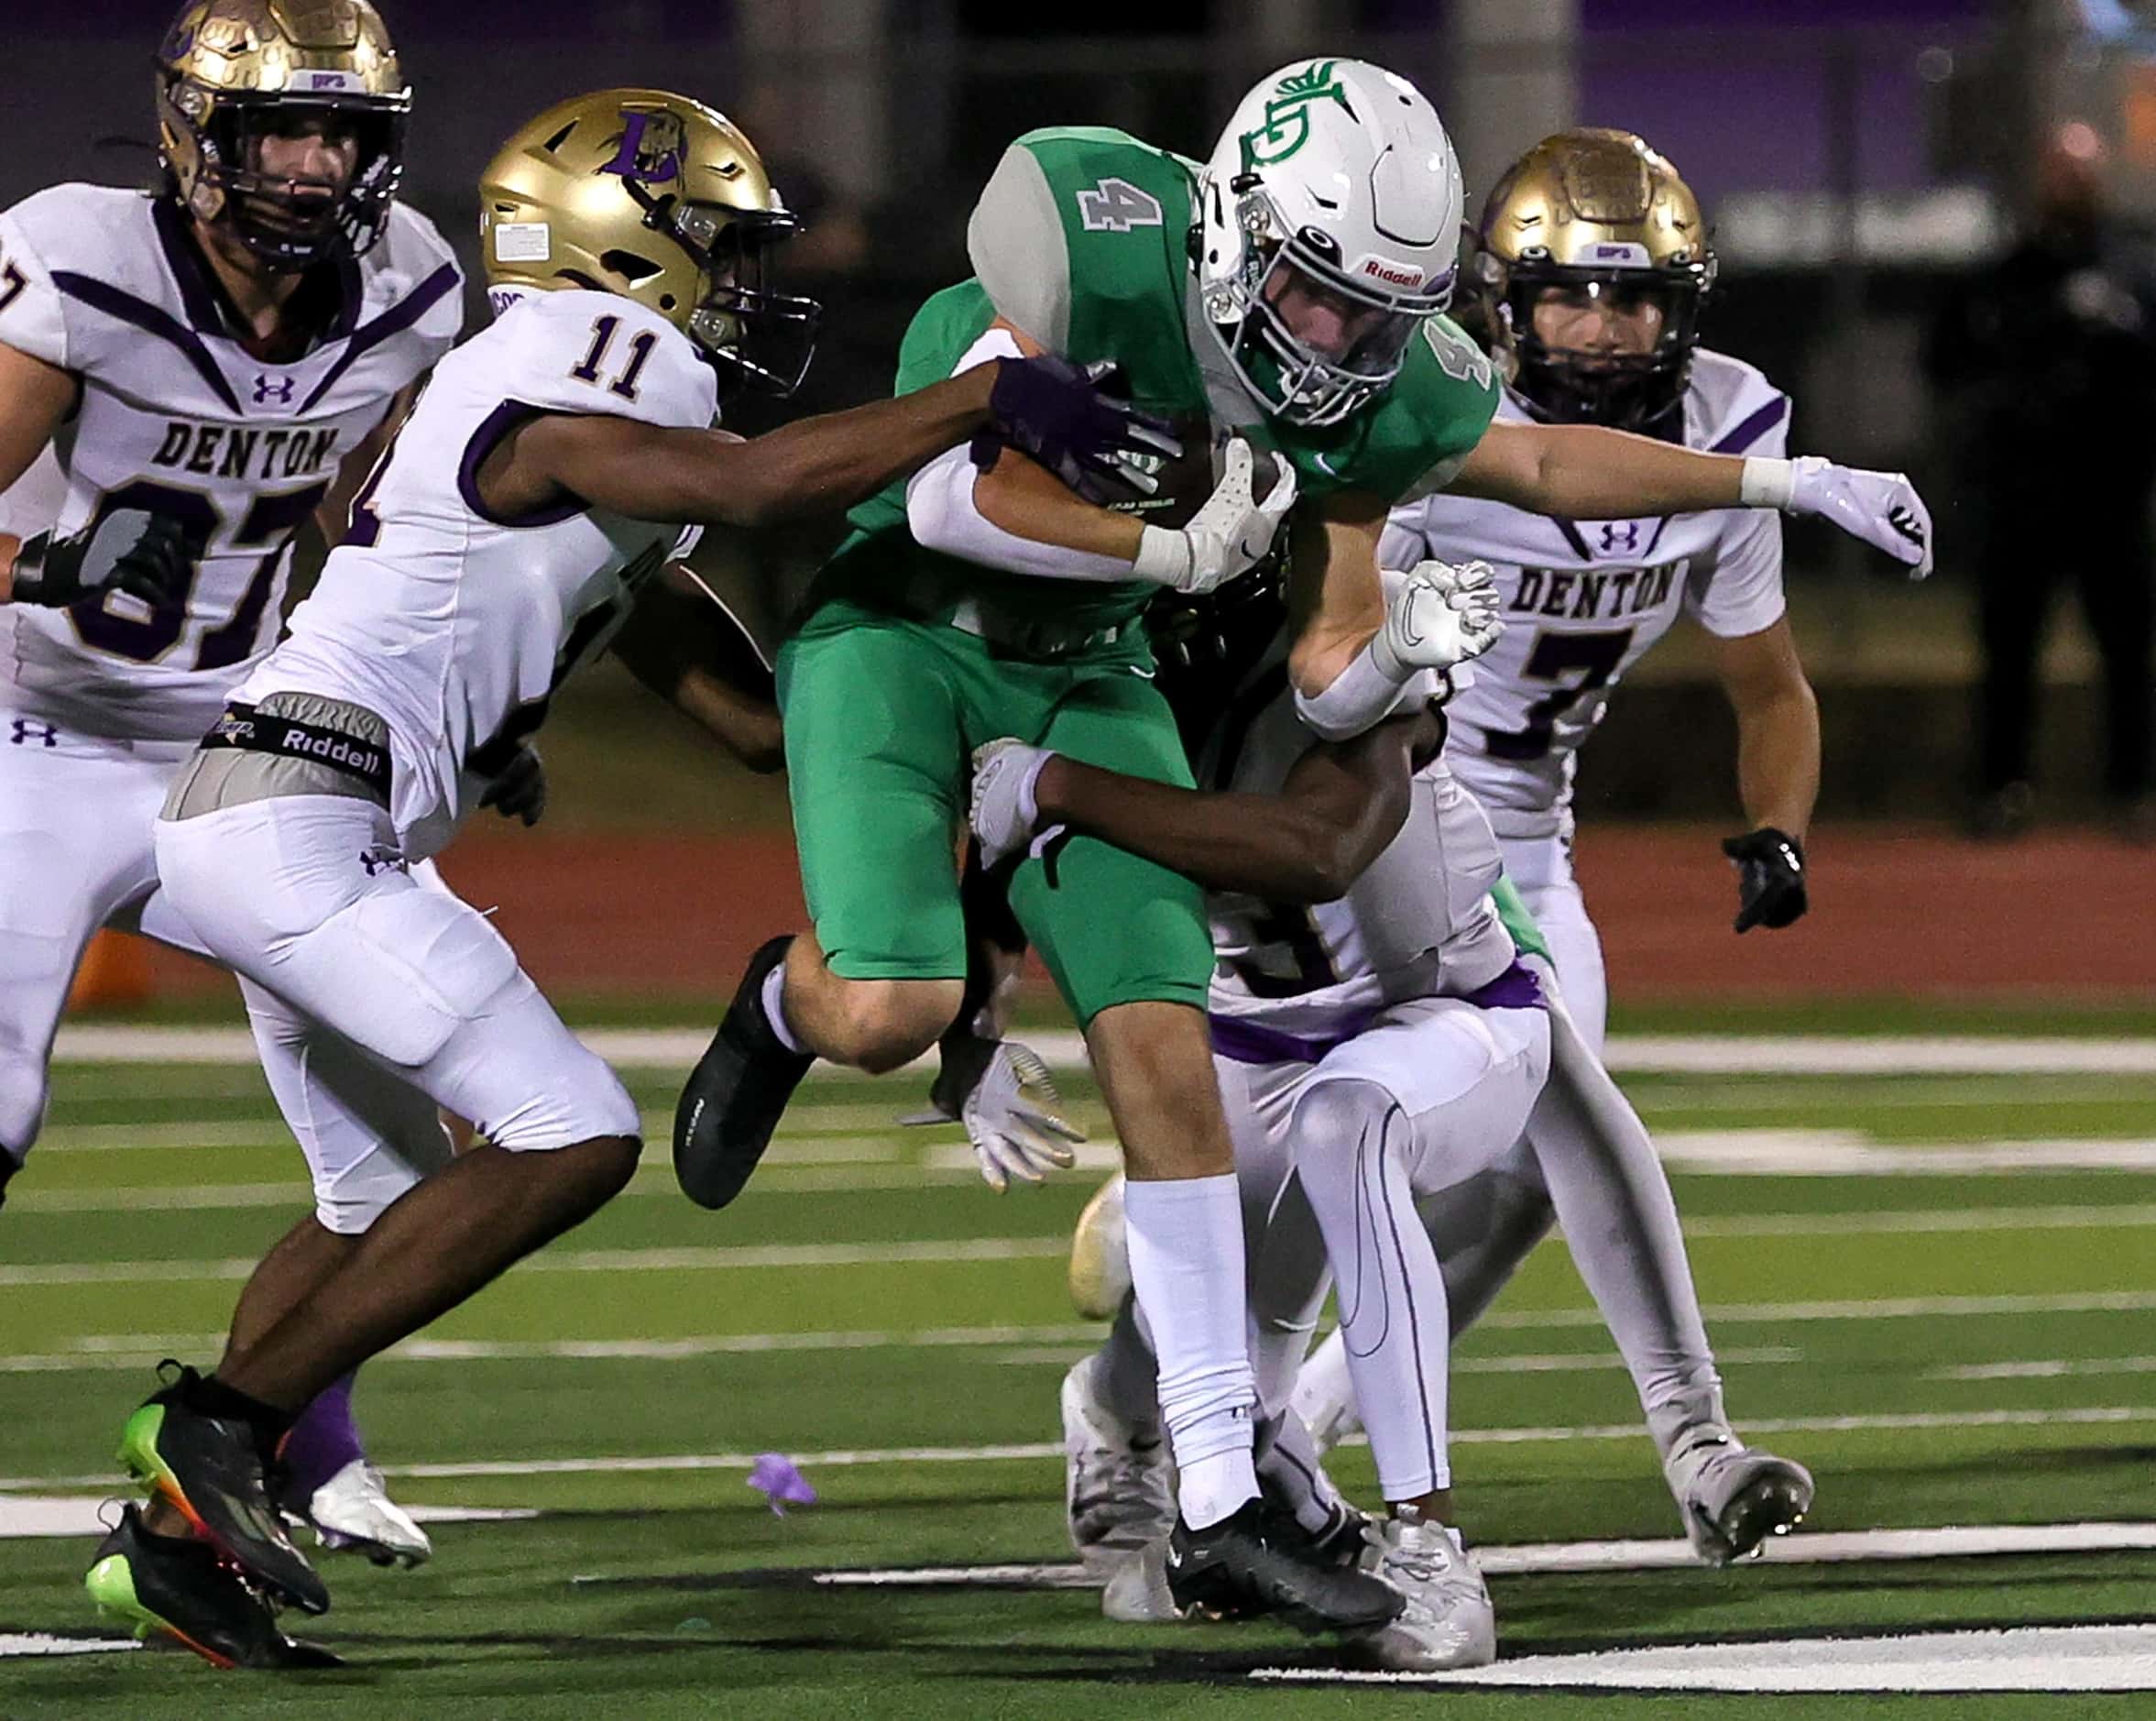 Lake Dallas running back Dylan Brauchle (4) breaks free for a big gain against Denton safety...